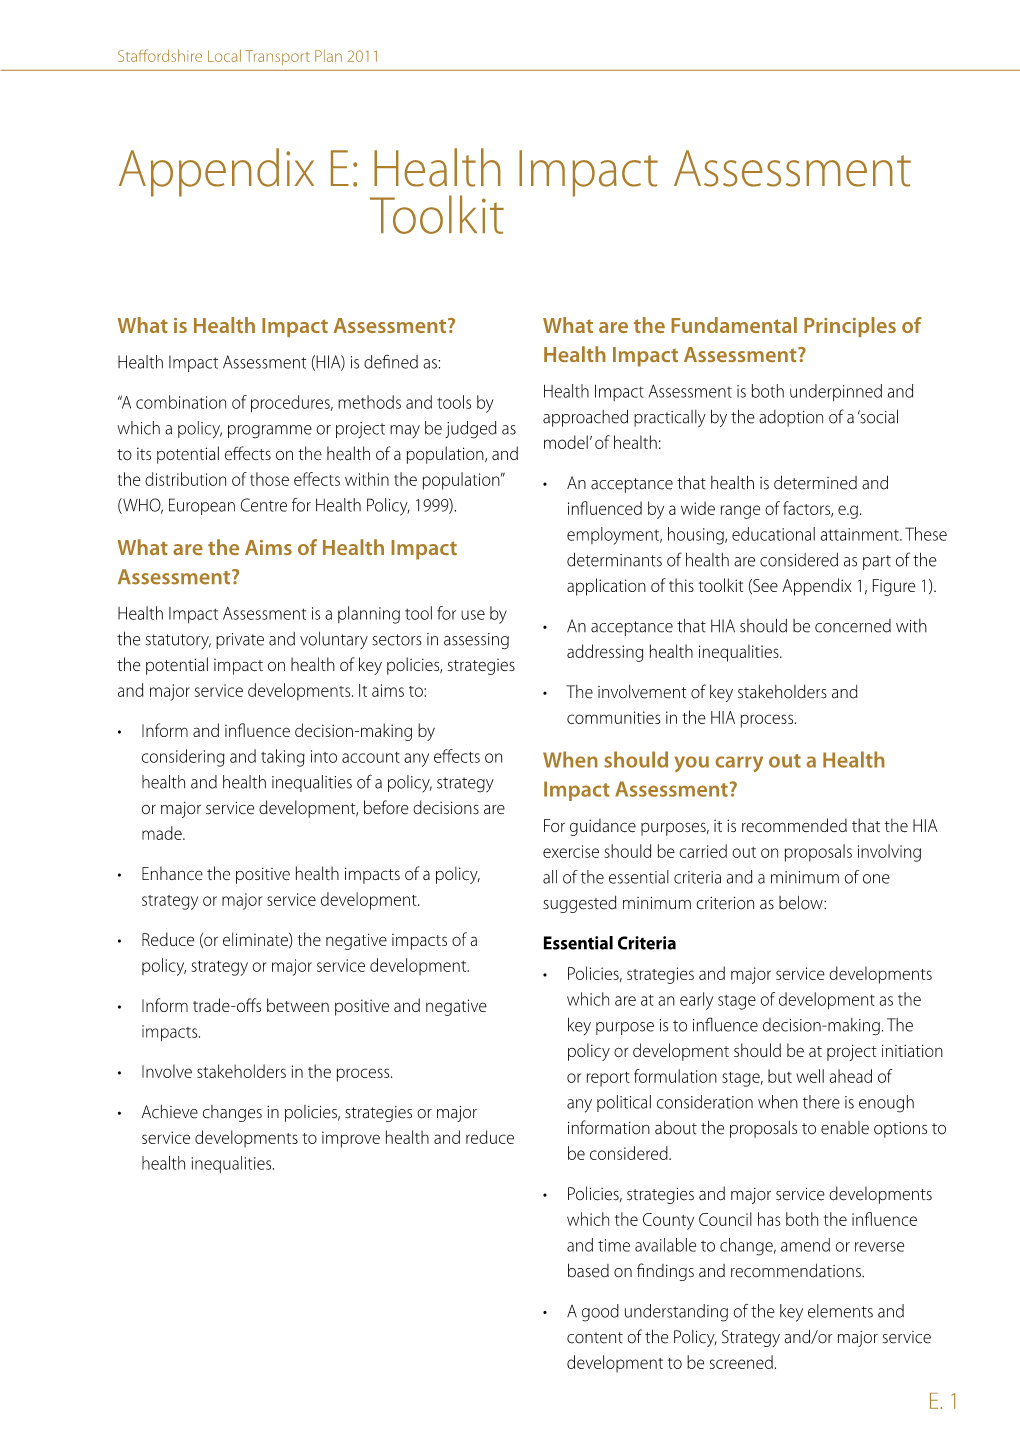 Health Impact Assessment Toolkit